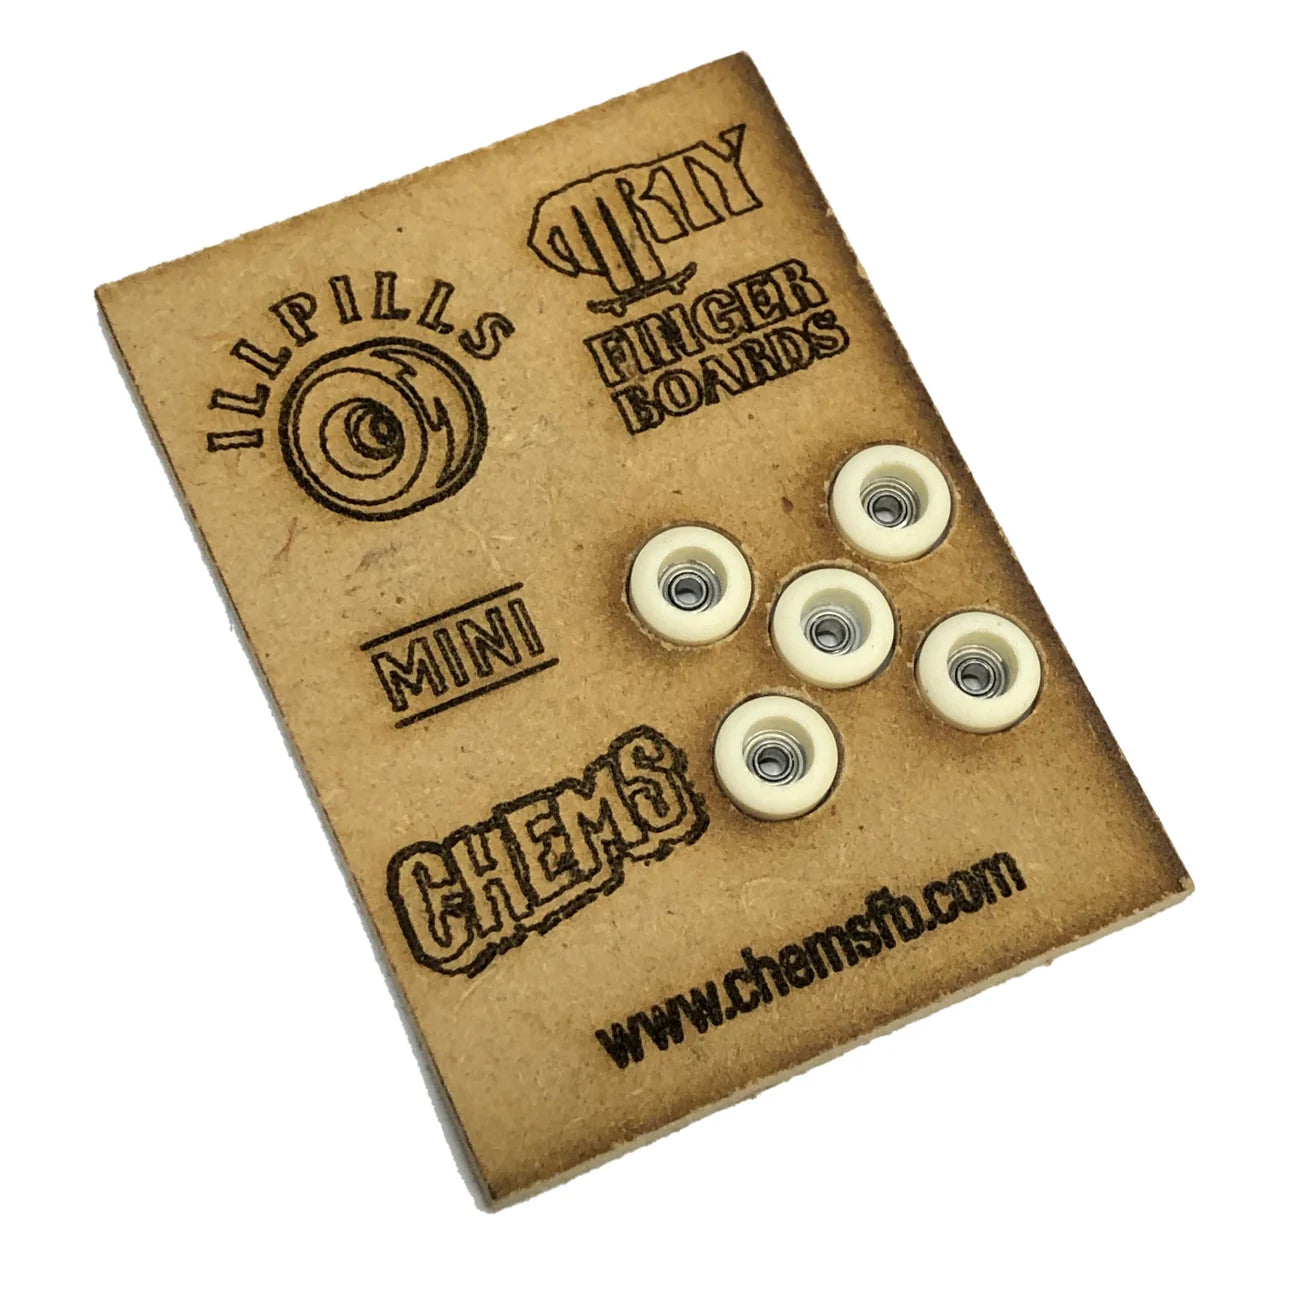 ILLPILLS MINI Urethane Fingerboard Wheels; White-colored wheels displayed in a unique package designed to resemble a piece of wood; Package Engraved with Chems and ILLPILLS logos for added branding; Made from high-quality urethane material for smooth and reliable performance; Enhances fingerboarding experience with improved grip and durability.